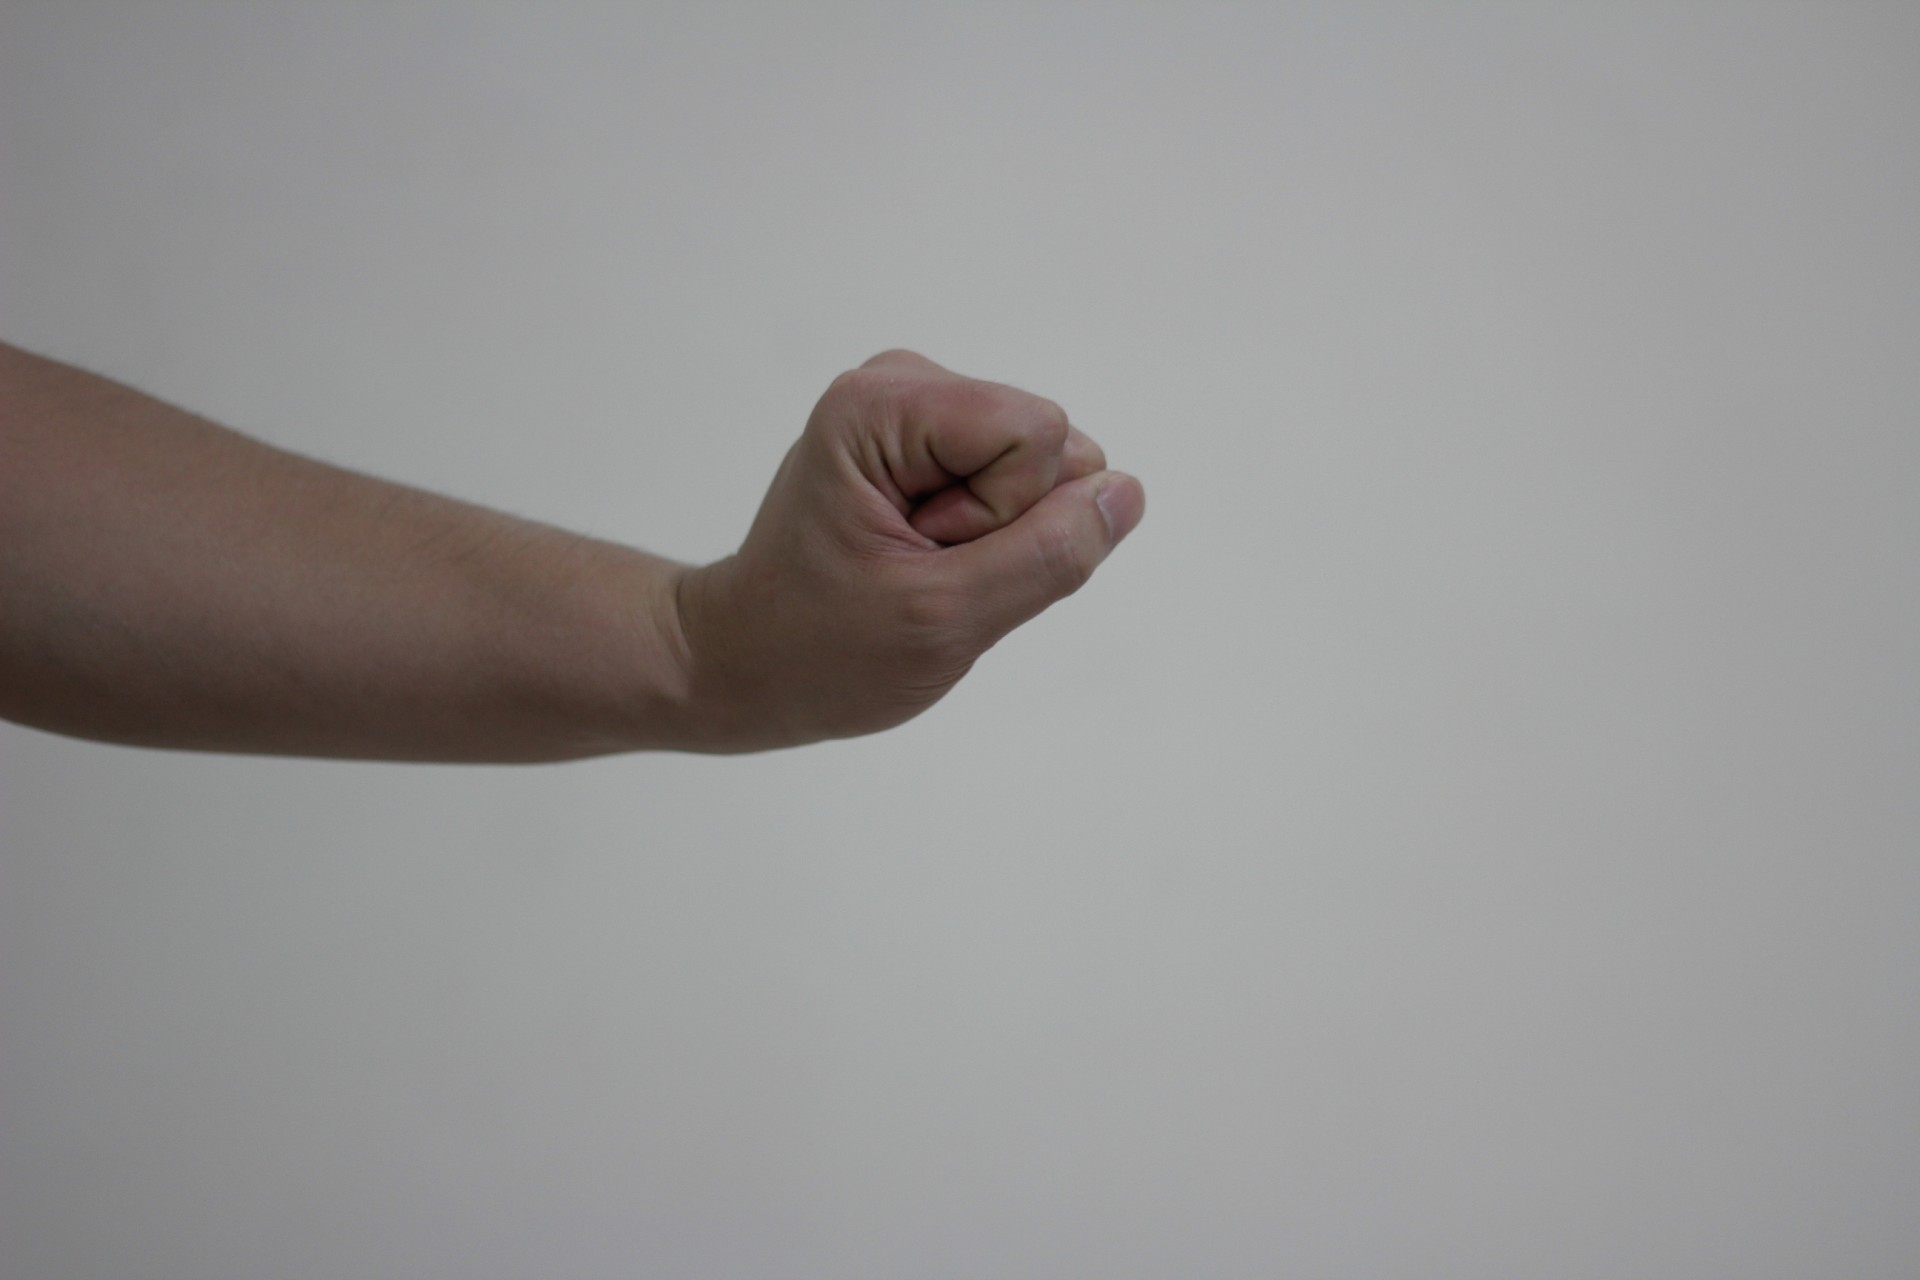 wrist extension clenched fist free photo